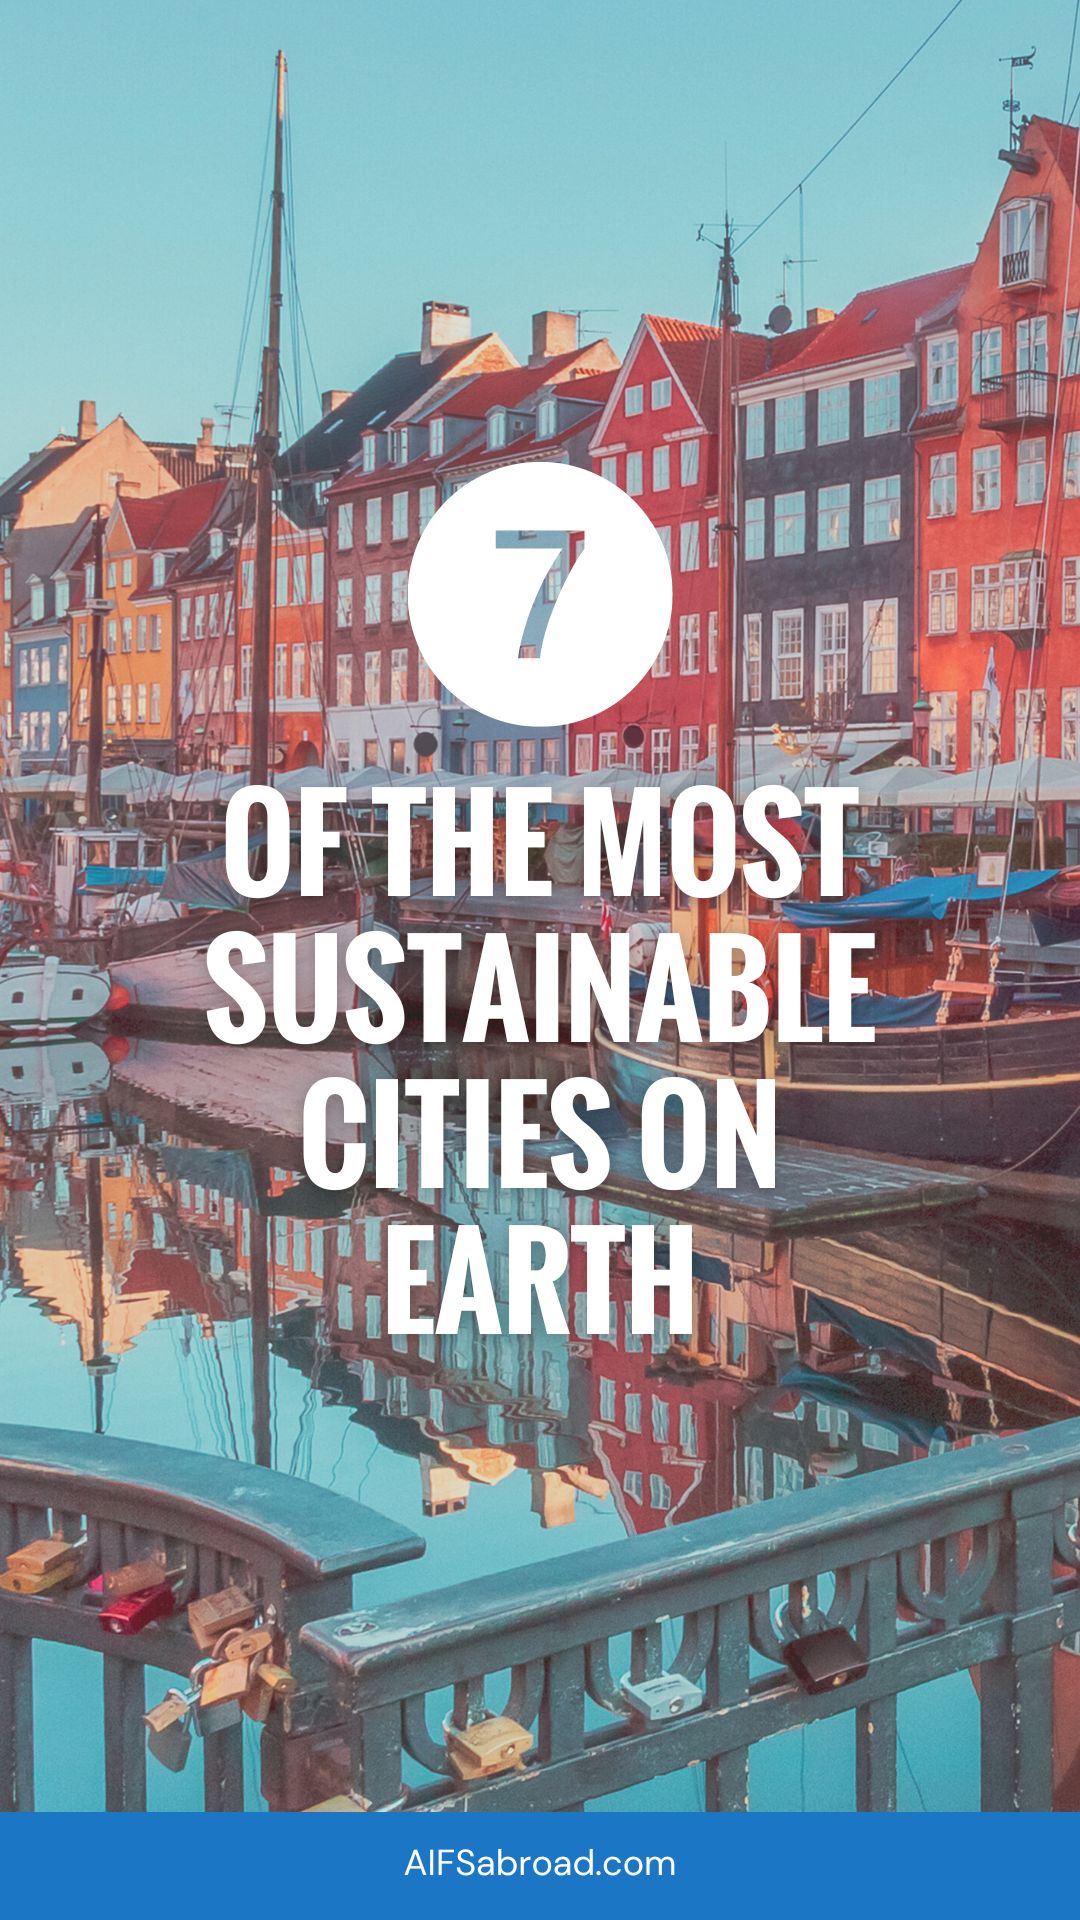 Pin image: image of Copenhagen, Denmark with text that says "7 of the Most Sustainable Cities on Earth"